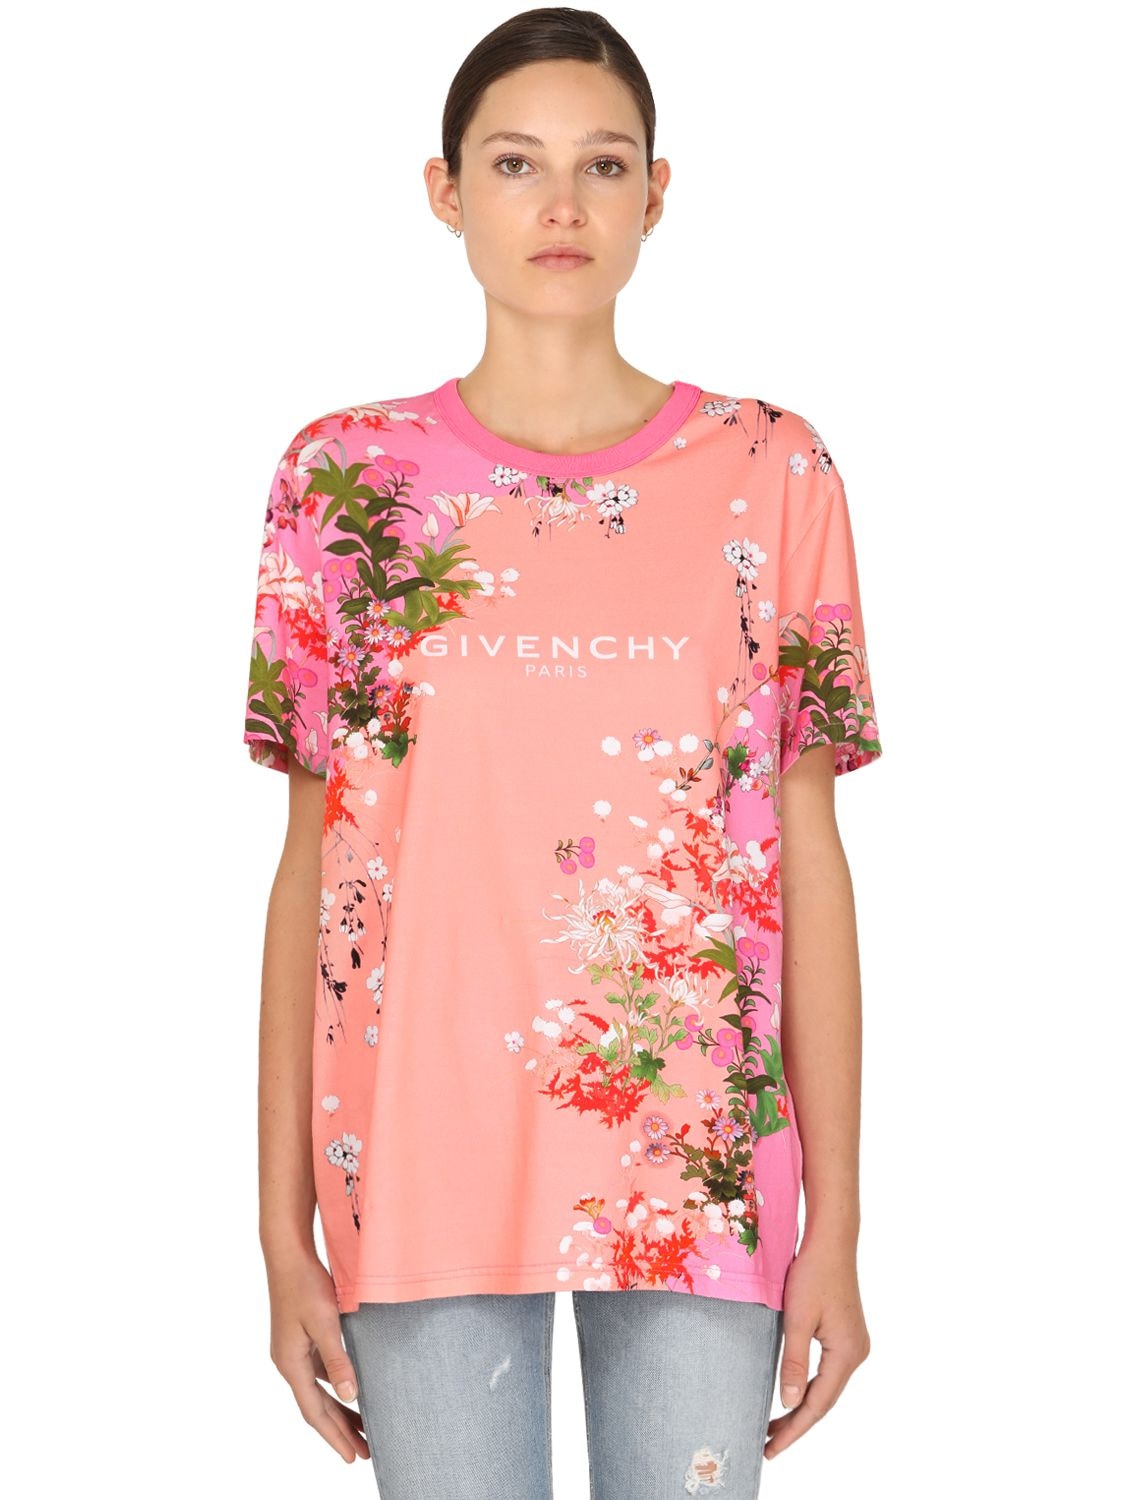 GIVENCHY FLOWER PRINTED COTTON JERSEY T-SHIRT,71IA7M056-NJGX0